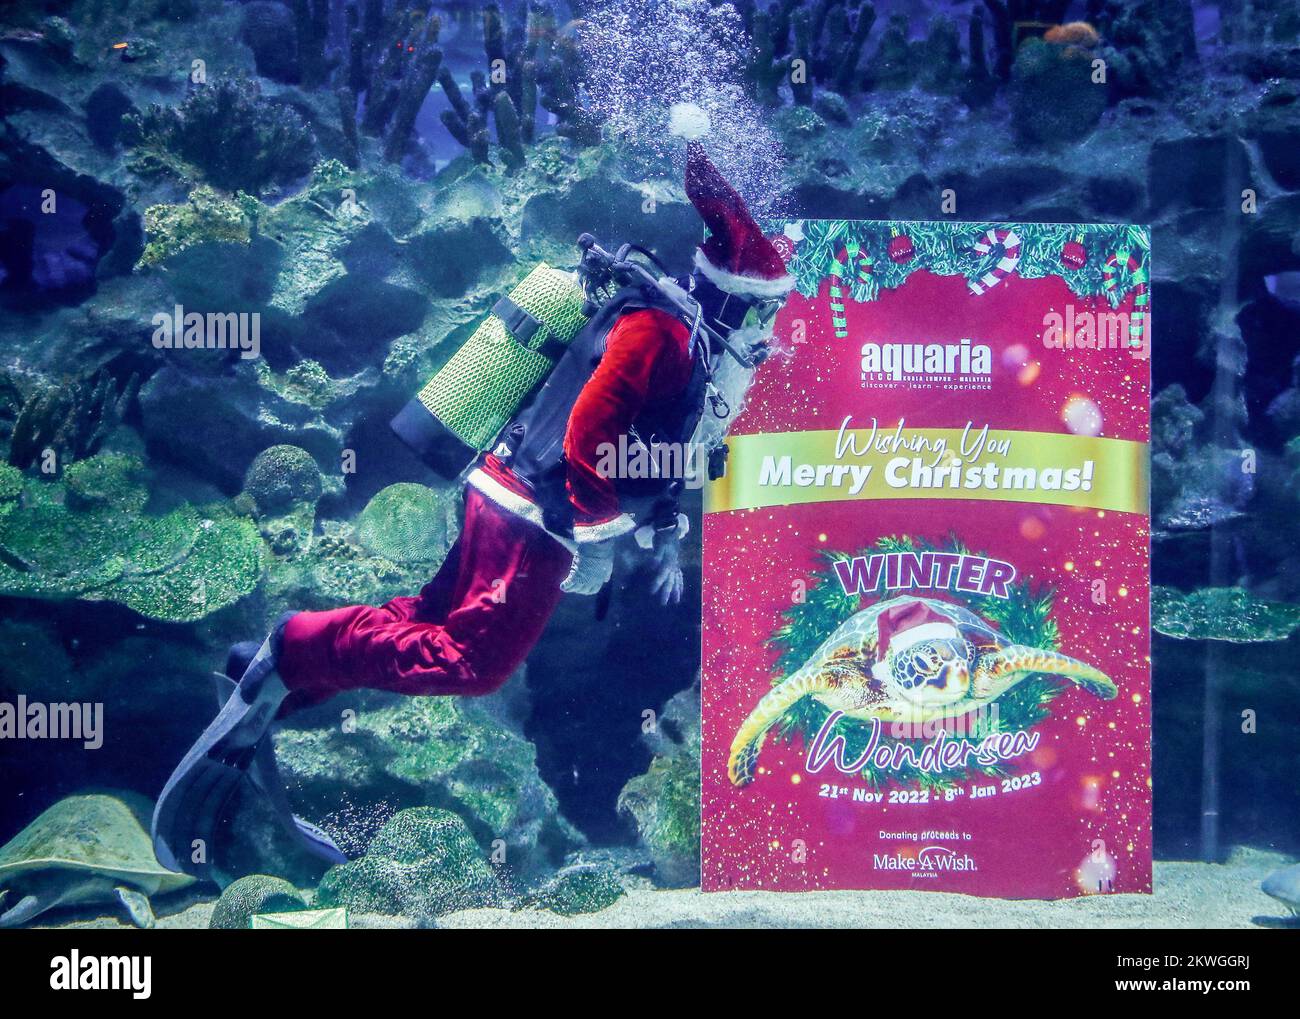 Kuala Lumpur, Malaysia. 30th Nov, 2022. A diver dressed as Santa Claus performs in a fish tank during a Make-A-Wish charity event at the Aquaria KLCC. The joint event between Aquaria KLCC and the Make-A-Wish organization of Malaysia, is to help the children's wishes and dreams be fulfilled! Credit: SOPA Images Limited/Alamy Live News Stock Photo